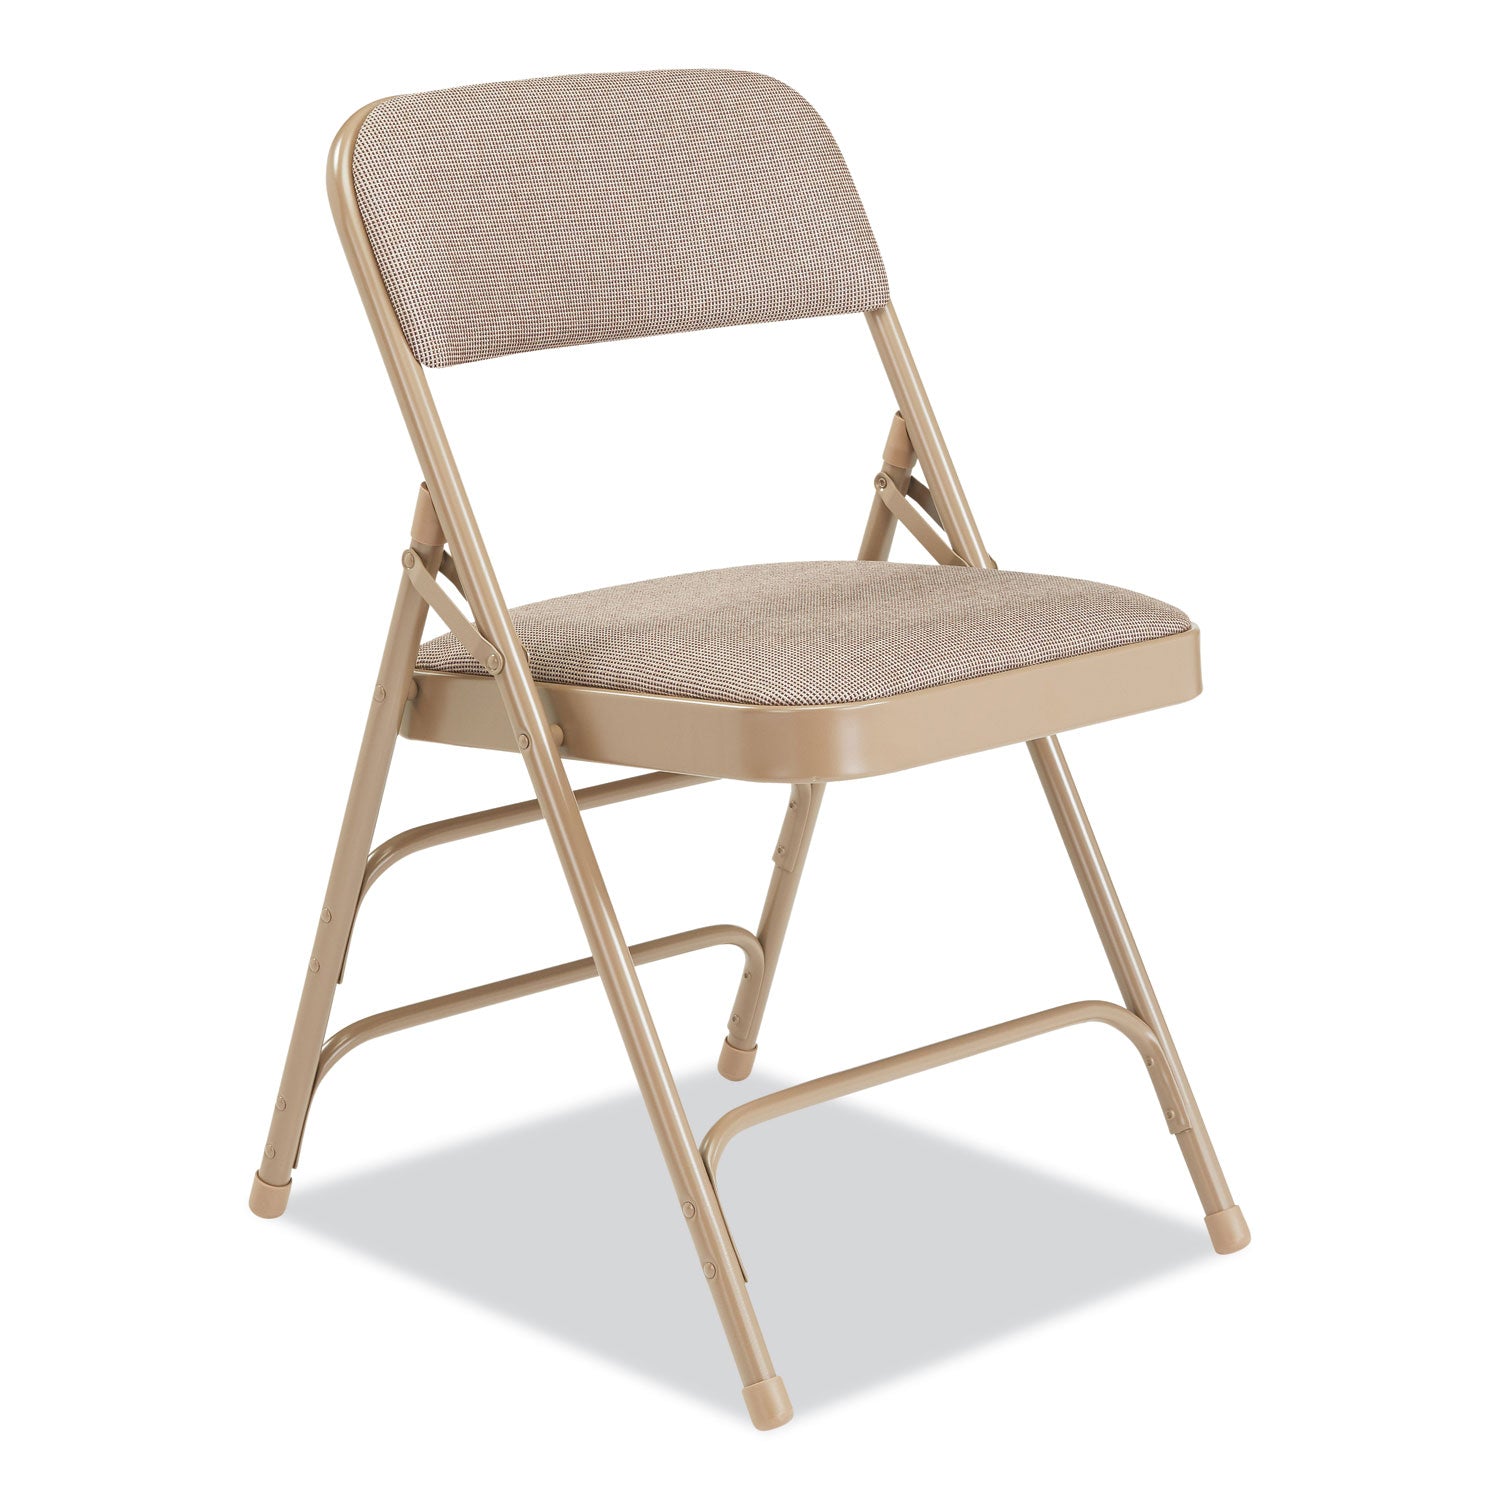 2300-series-fabric-triple-brace-double-hinge-premium-folding-chair-supports-500-lb-cafe-beige-4-ct-ships-in-1-3-bus-days_nps2301 - 2